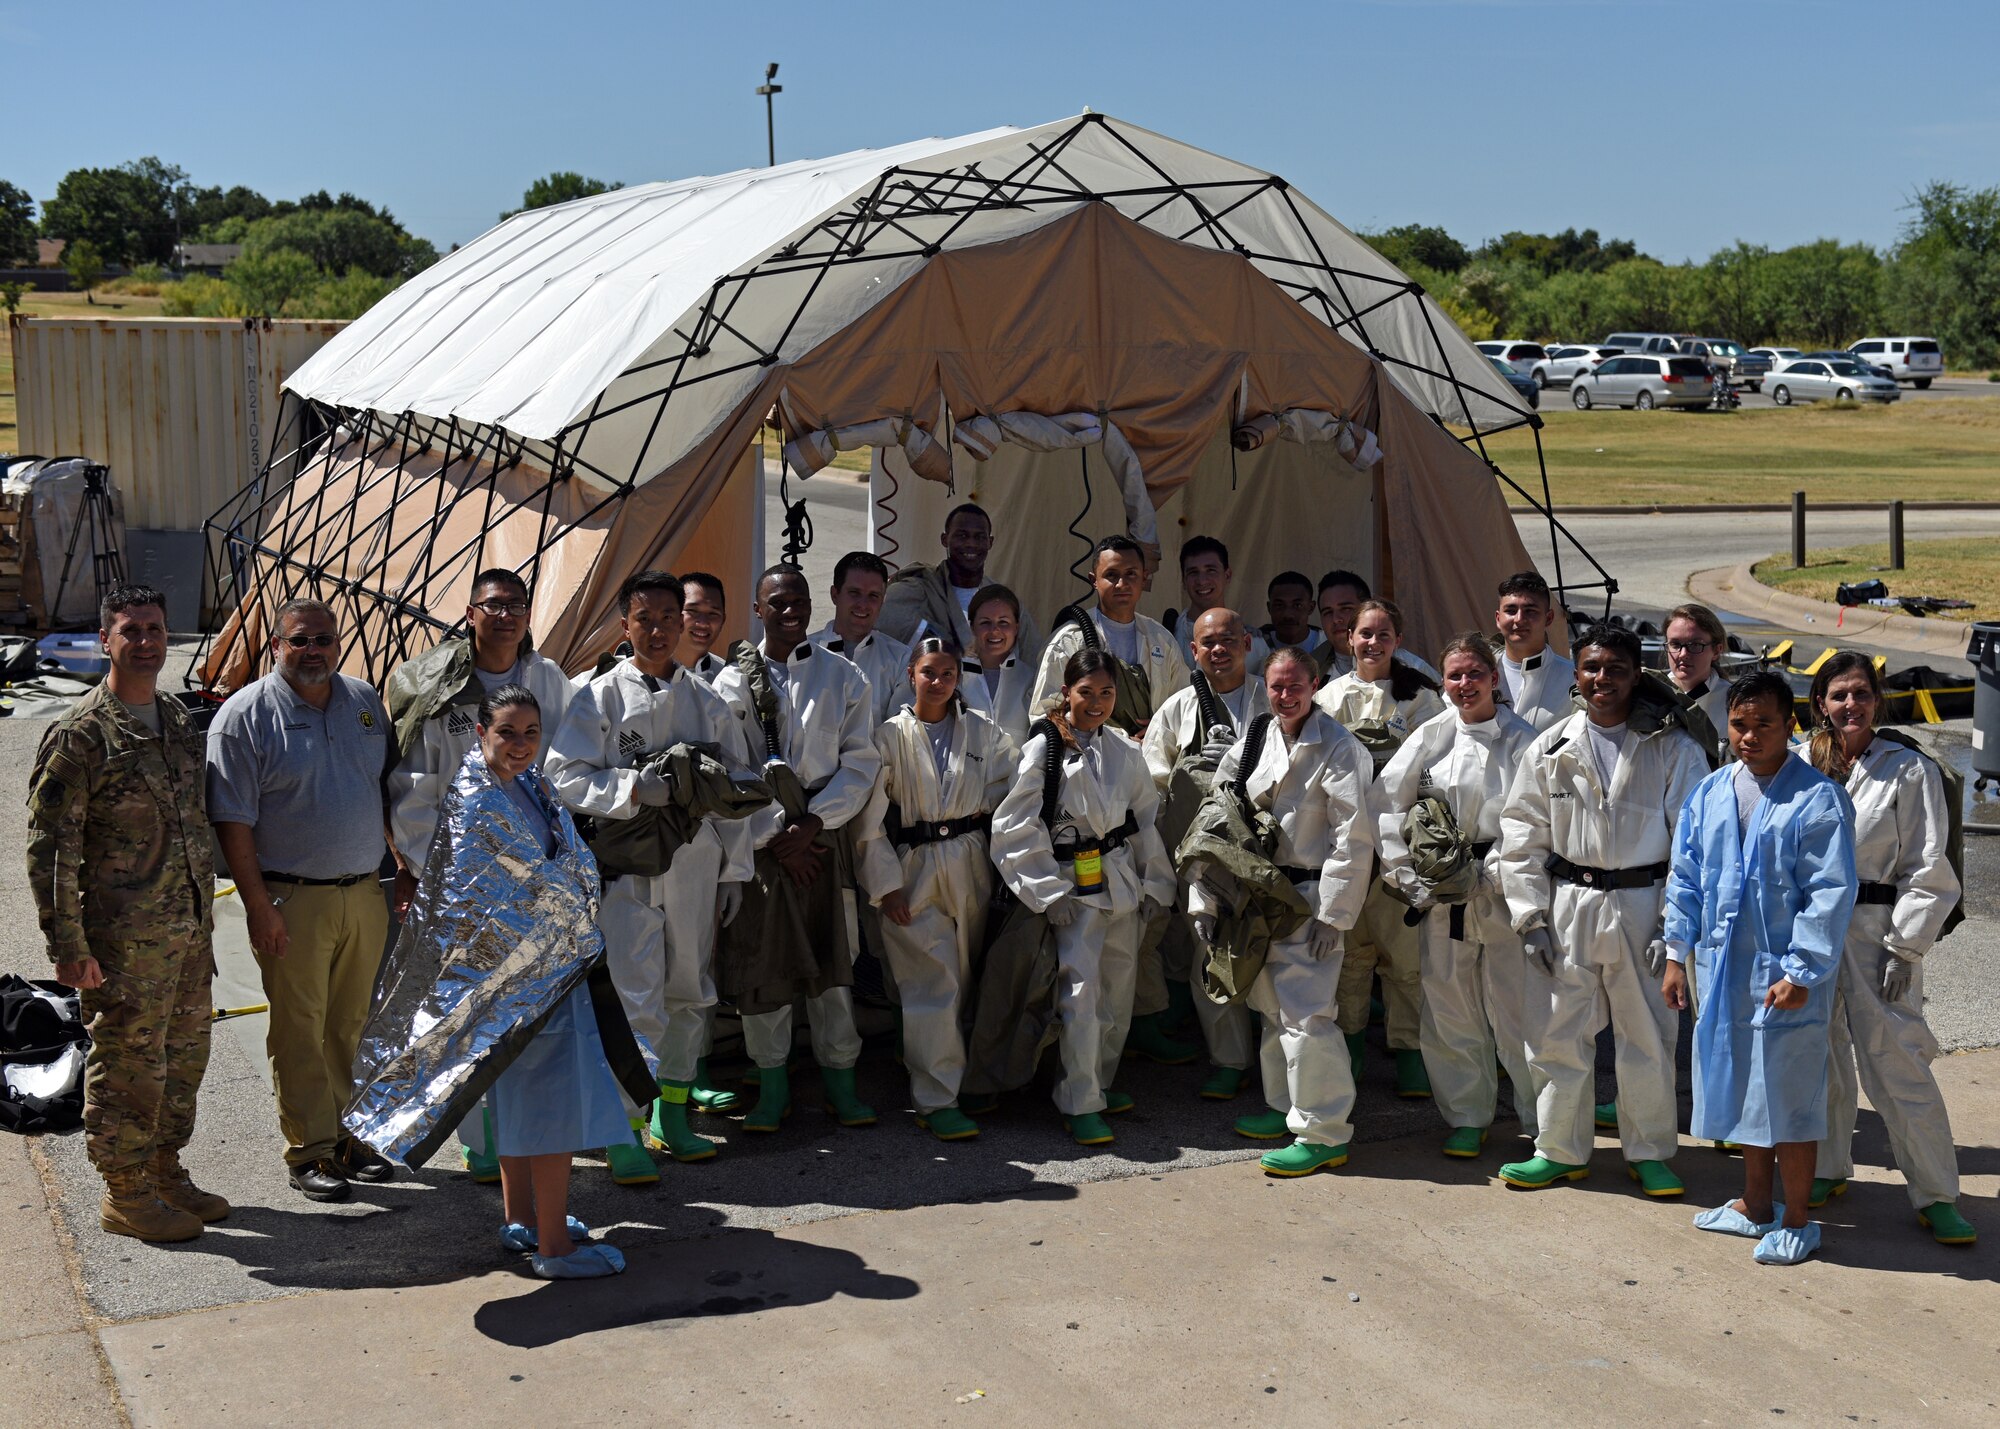 Personnel from the 17th Medical Group stand outside of the decontamination center during their medical in-place decontamination training at the Ross Clinic on Goodfellow Air Force Base, Texas, September 12, 2019. This training is to prepare medical personnel to handle decontaminations in emergency situations. (U.S. Air Force photo by Airman 1st Class Robyn Hunsinger/Released)